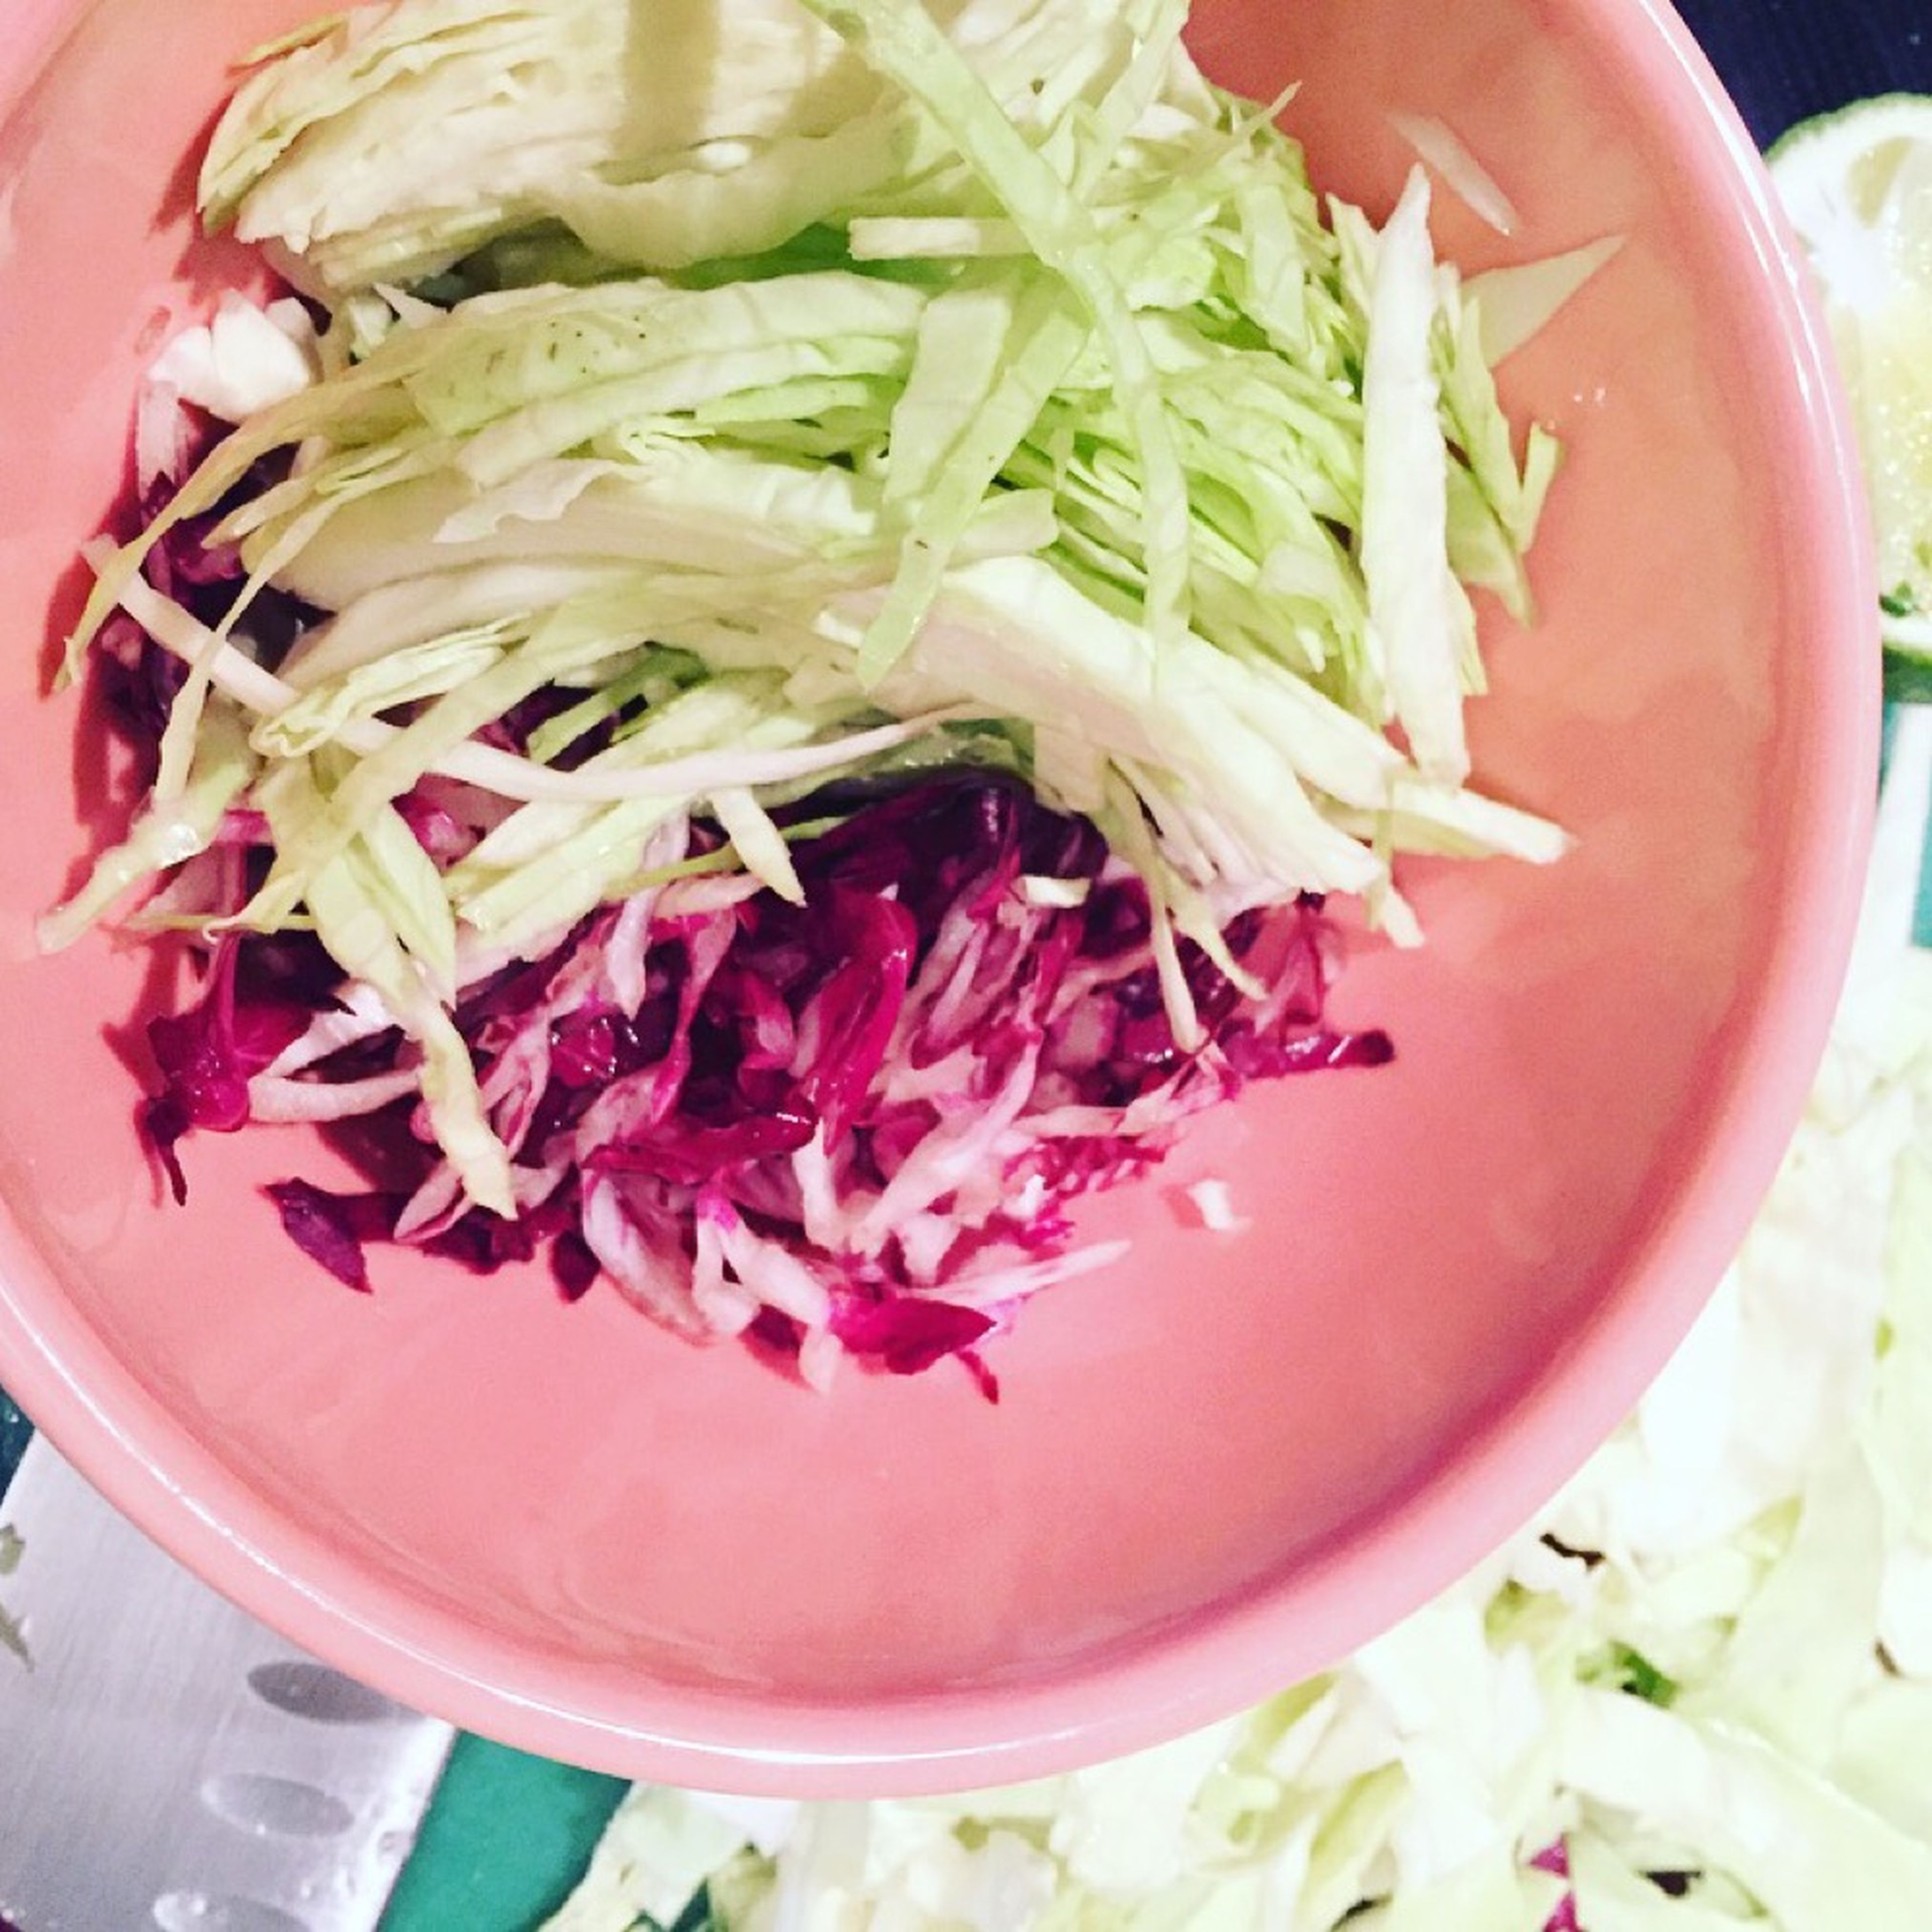 Thinly slice cabbage and radicchio and add to a bowl. Add apple cider vinegar, tossing to combine, and set aside.